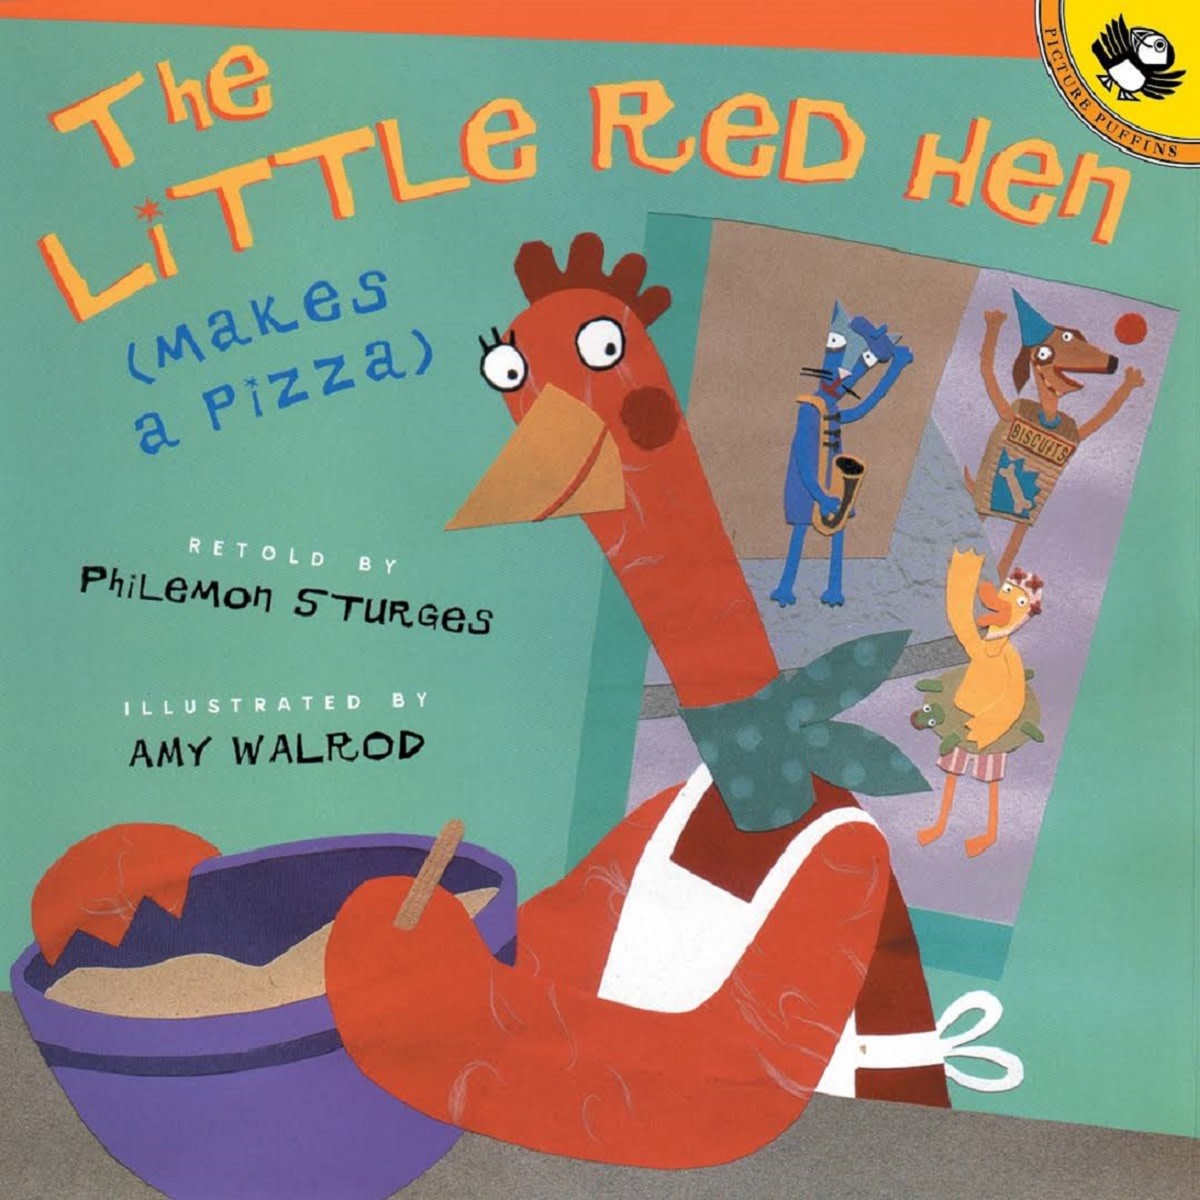 The Little Red Hen Makes a Pizza by Philemon Sturges